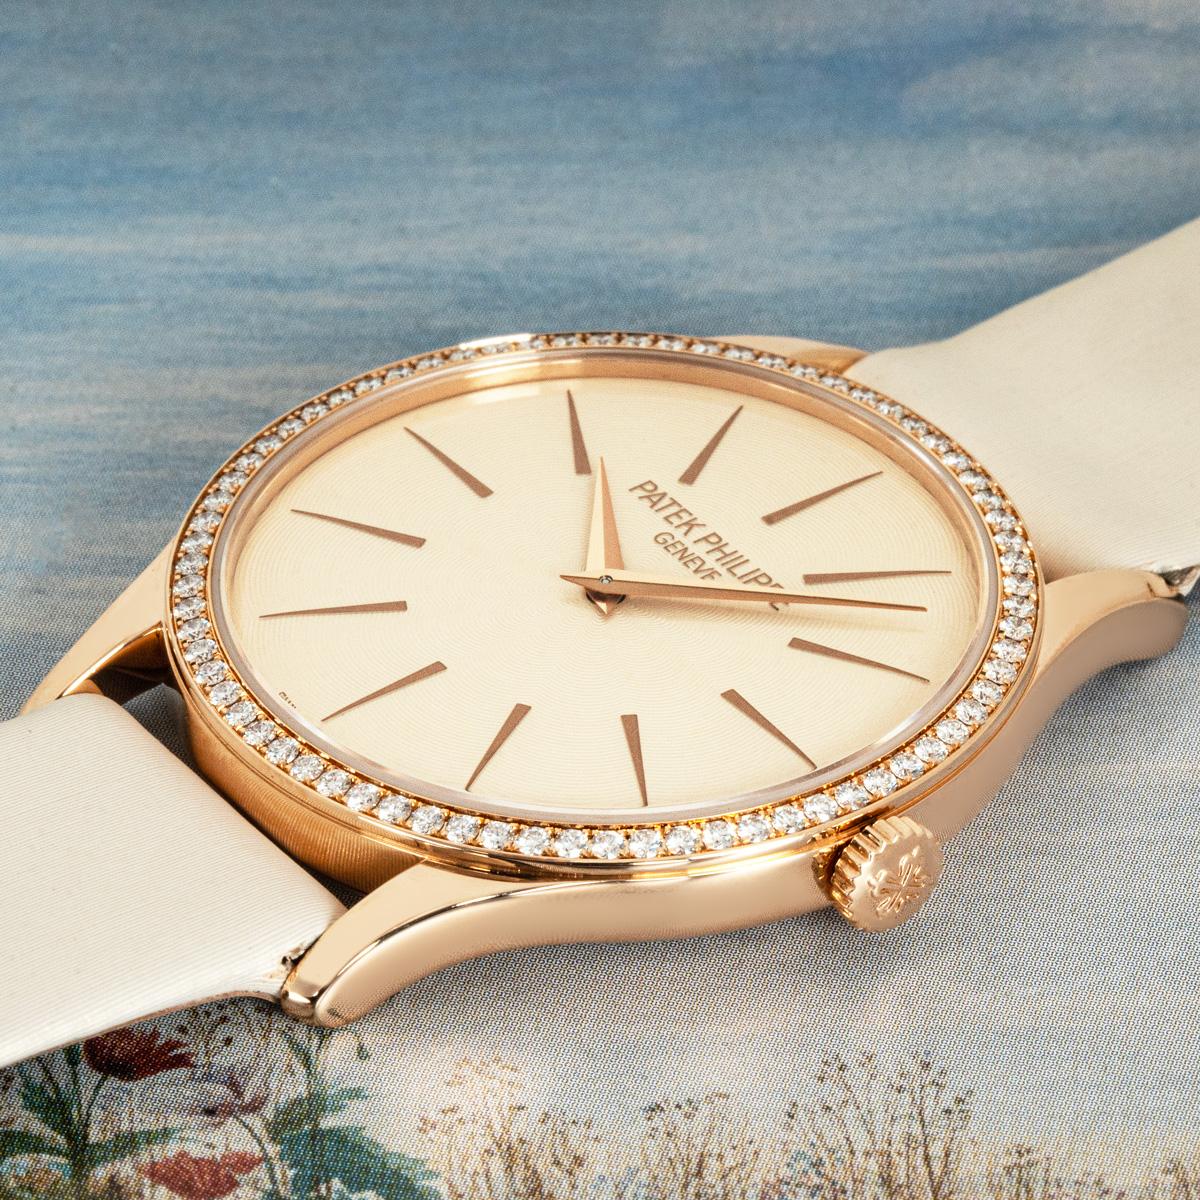 A ladies Calatrava in rose gold by Patek Philippe. Featuring a cream dial with a rose gold bezel set with 72 round brilliant diamonds, weighing 0.52ct.

Fitted with sapphire crystal and a manual wind movement which can be admired through the